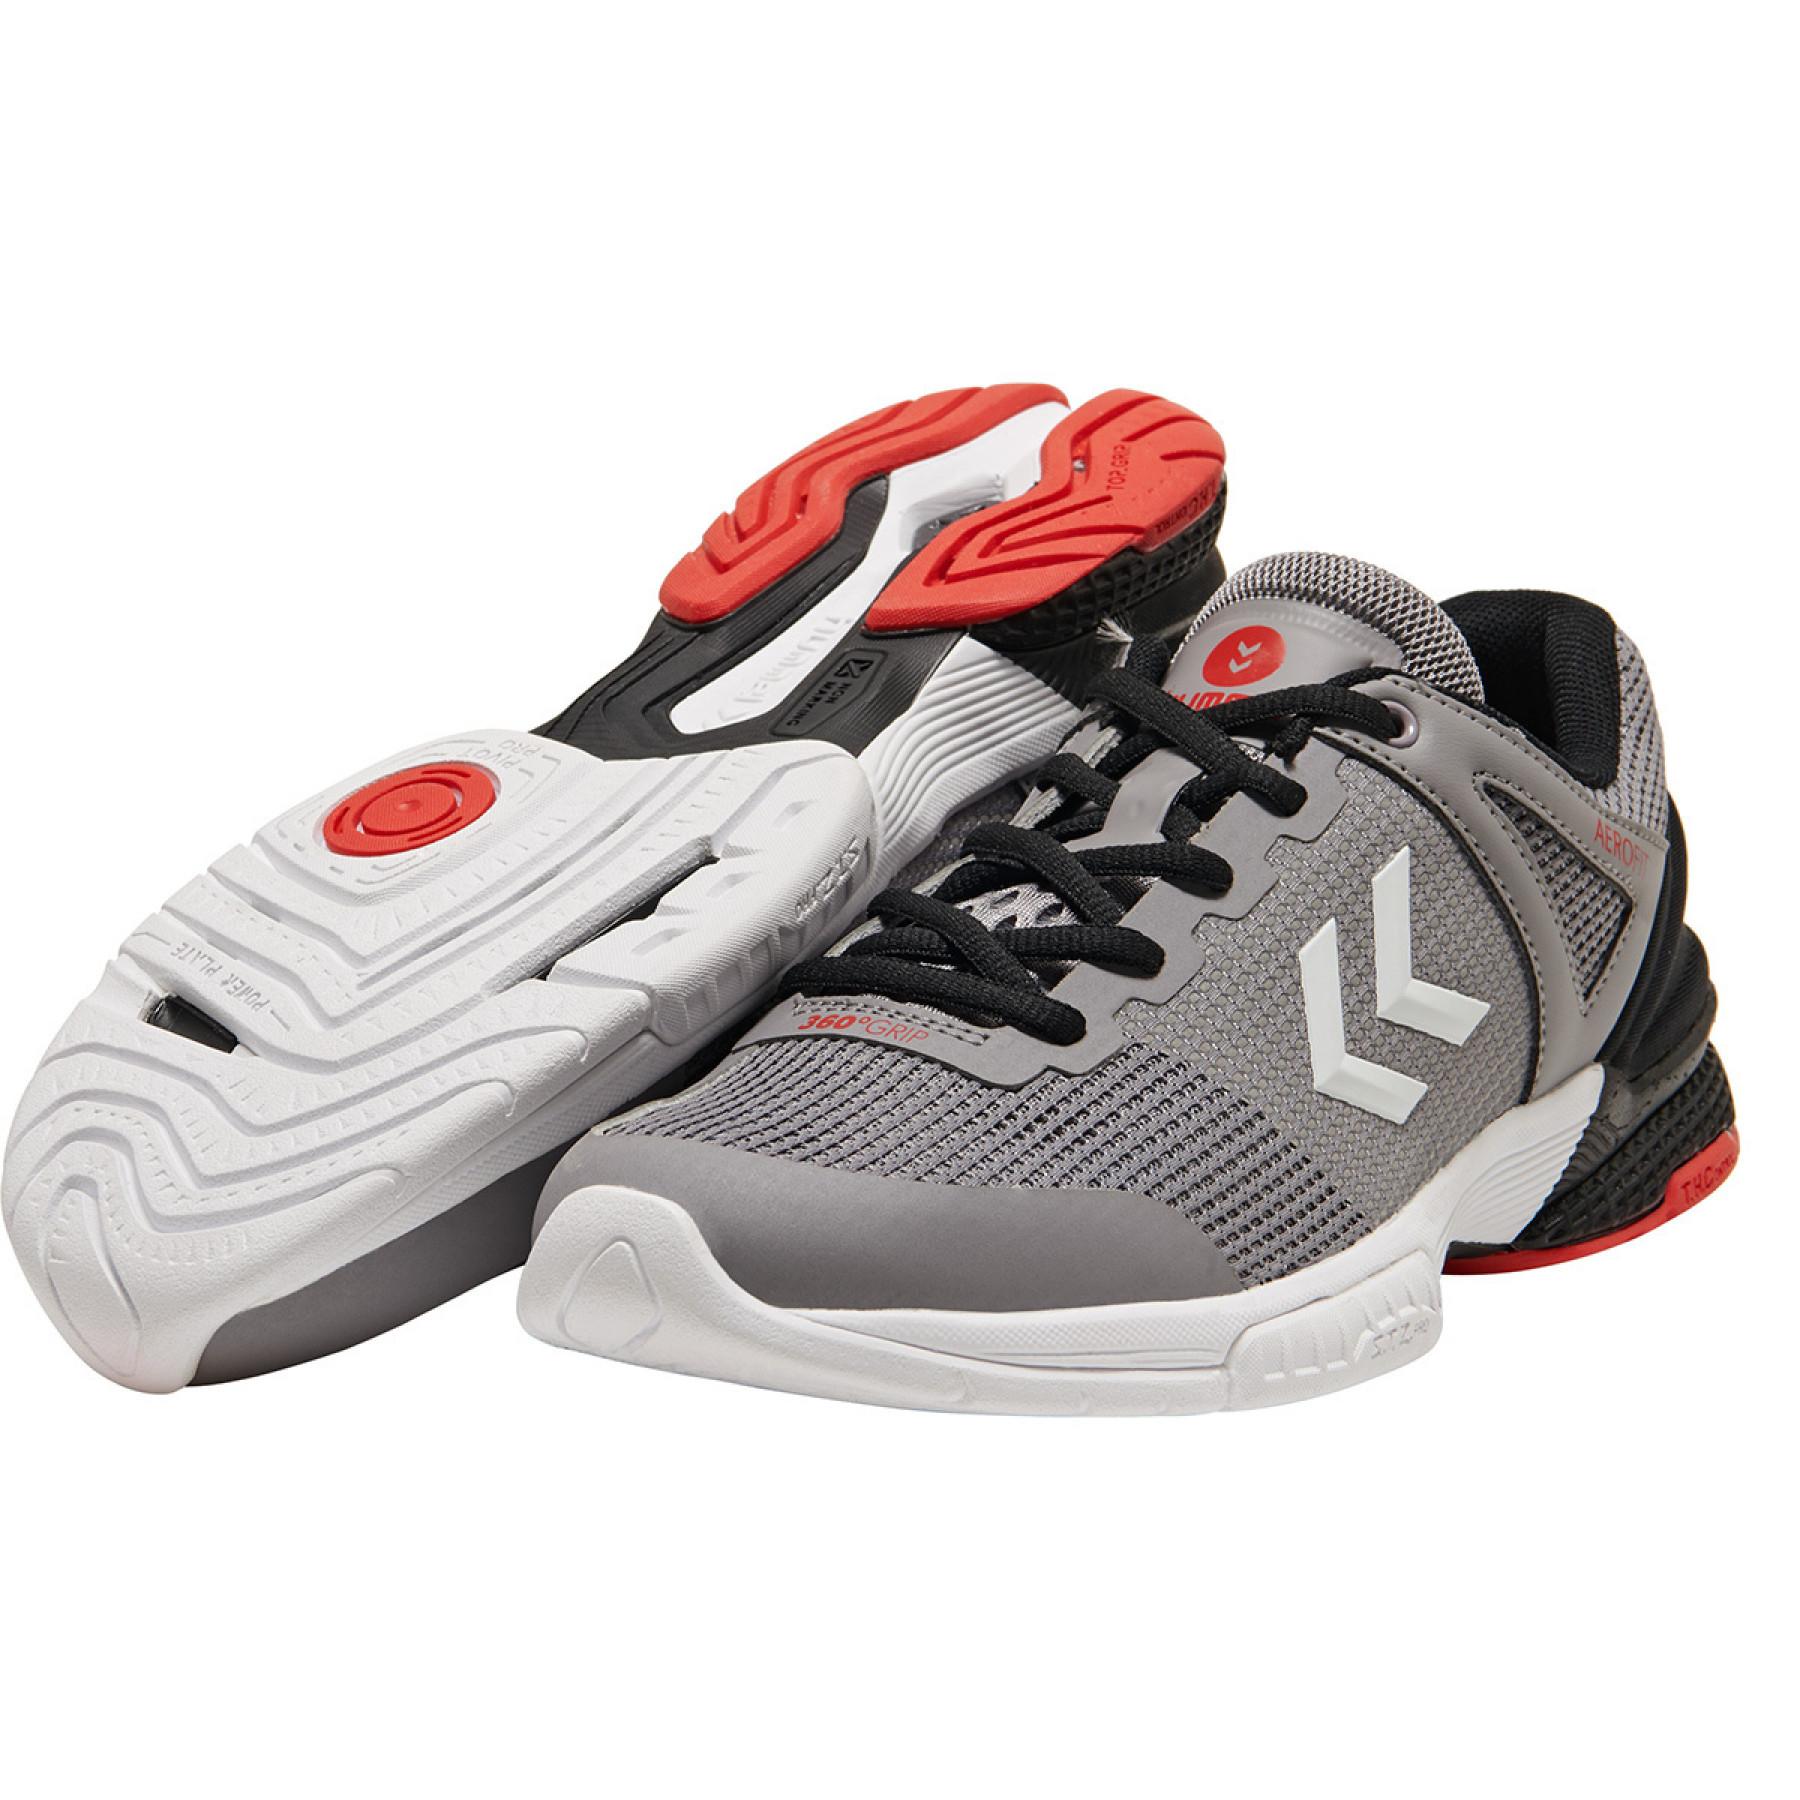 Zapatos Hummel Aerocharge Hb180 Rely 3.0 Trophy